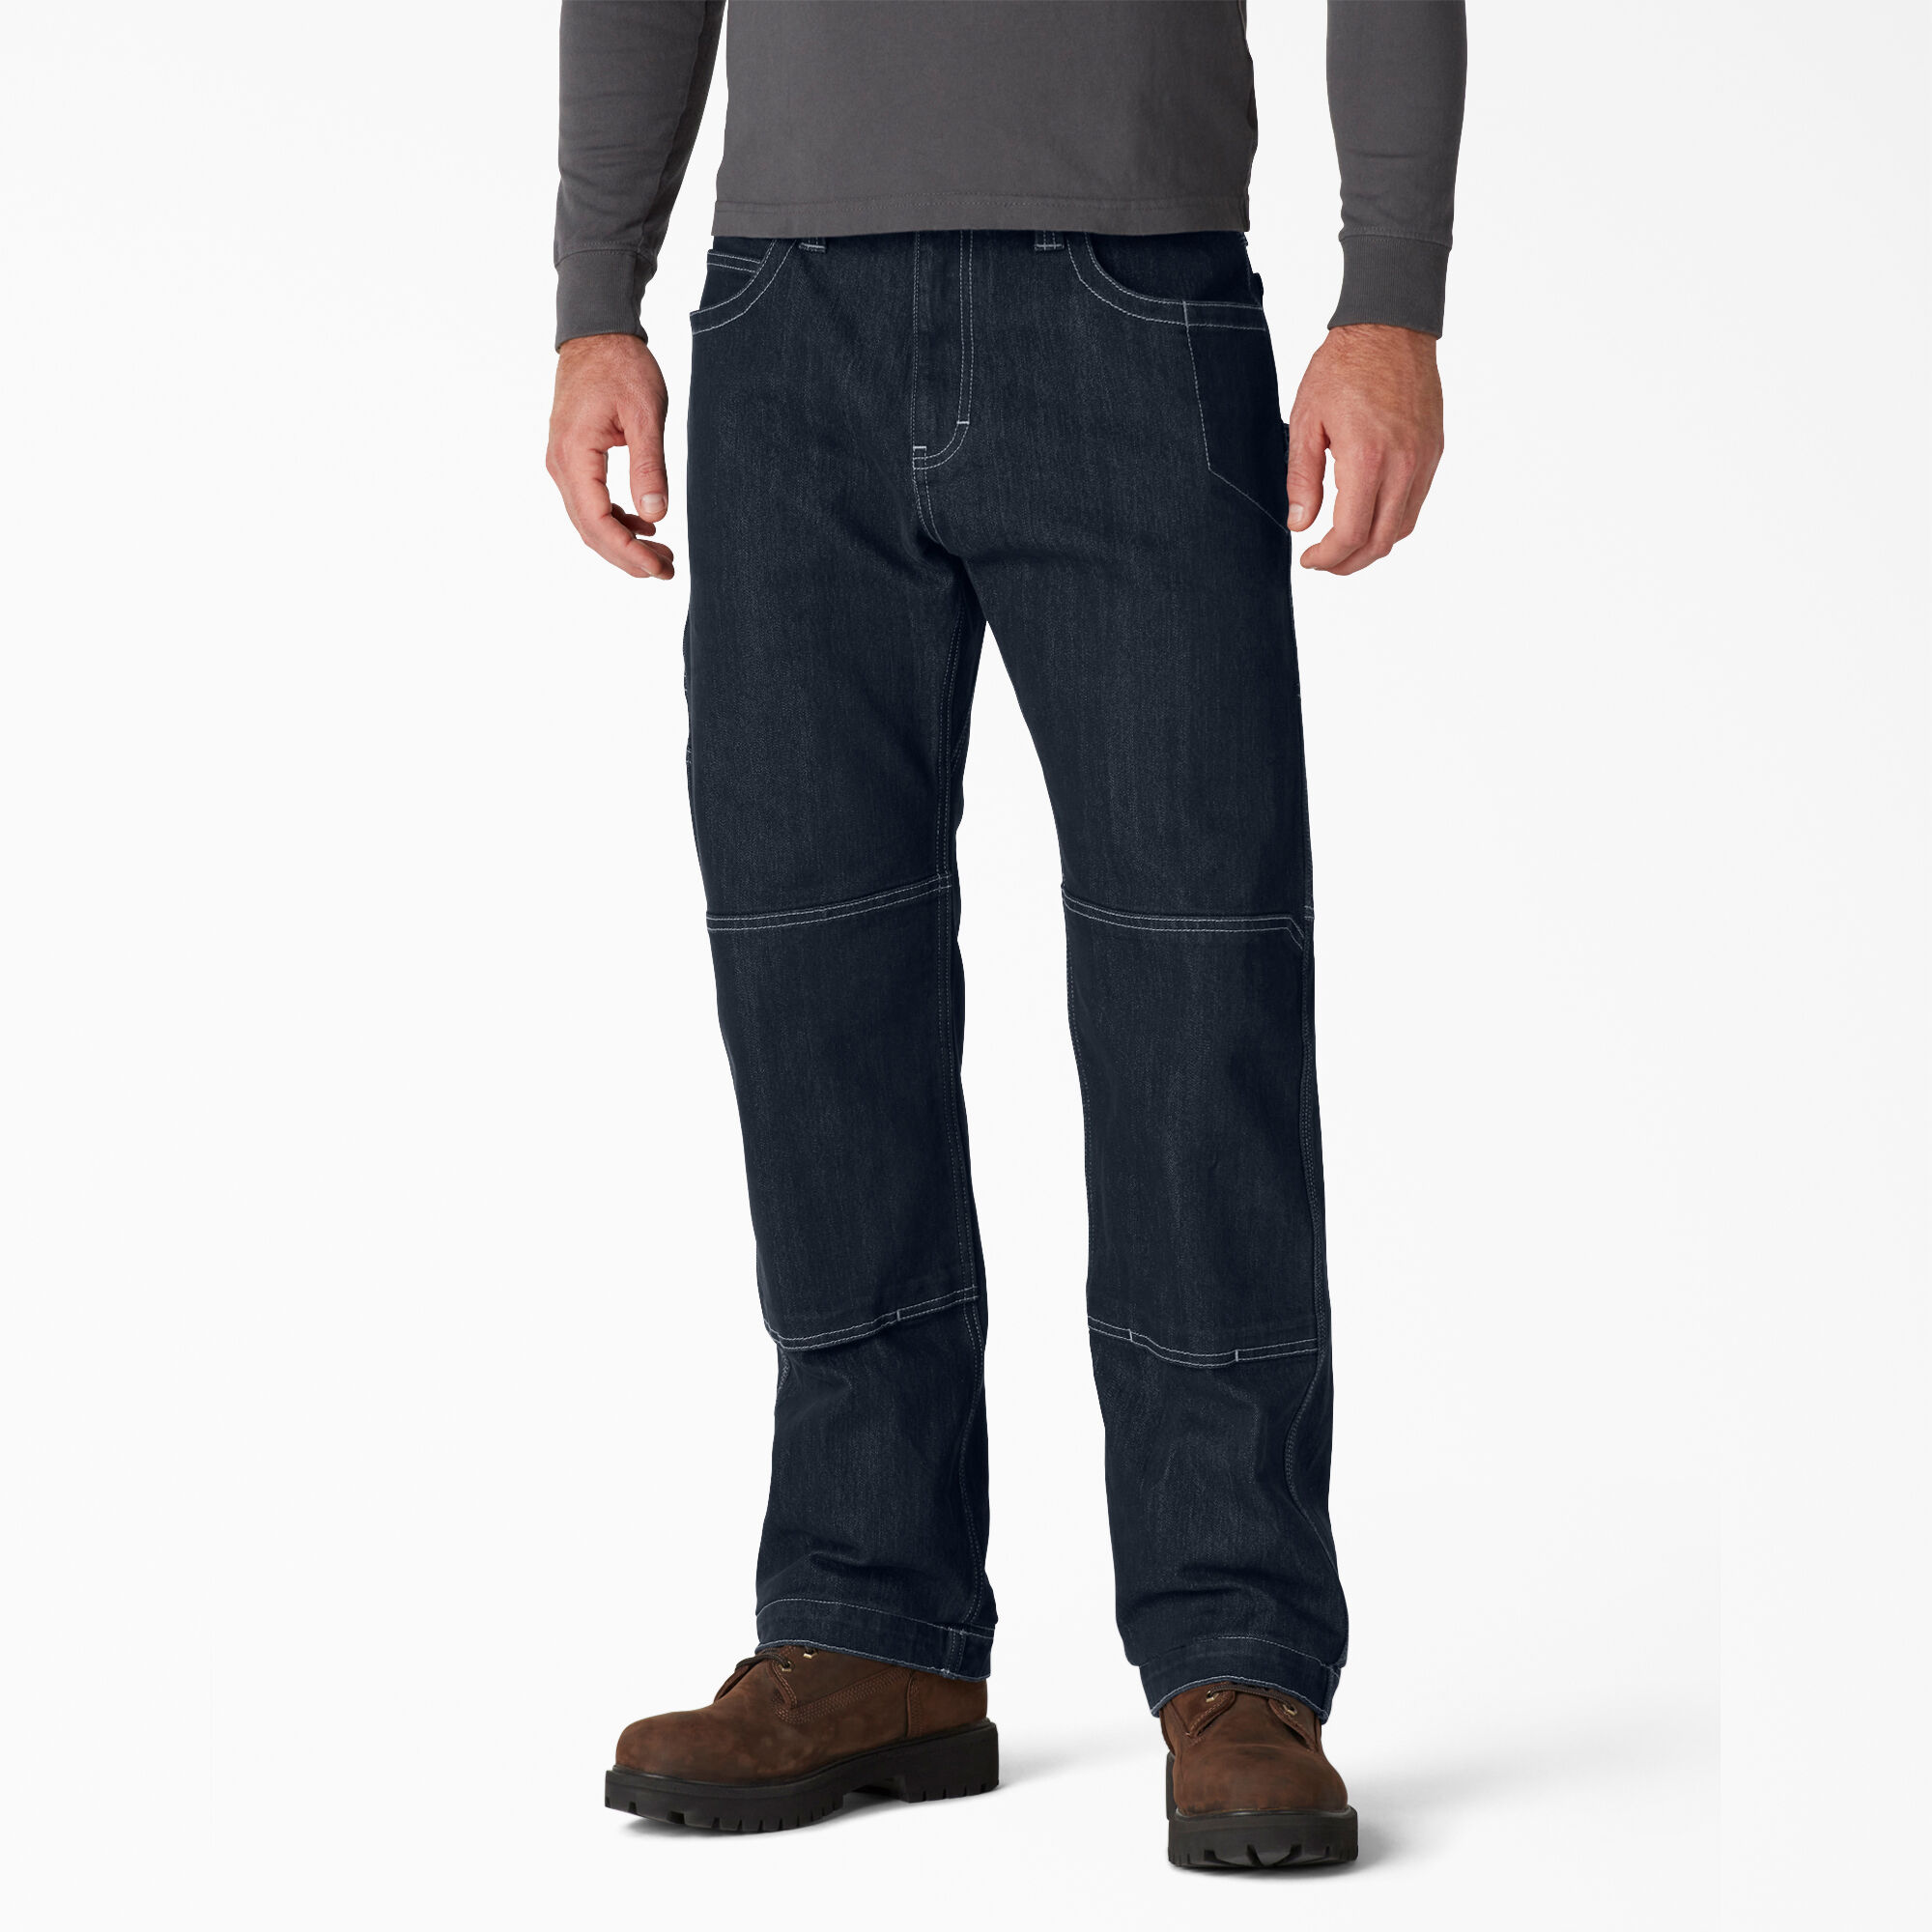 FLEX DuraTech Relaxed Fit Jeans - Dickies US, Dark Overdyed Wash